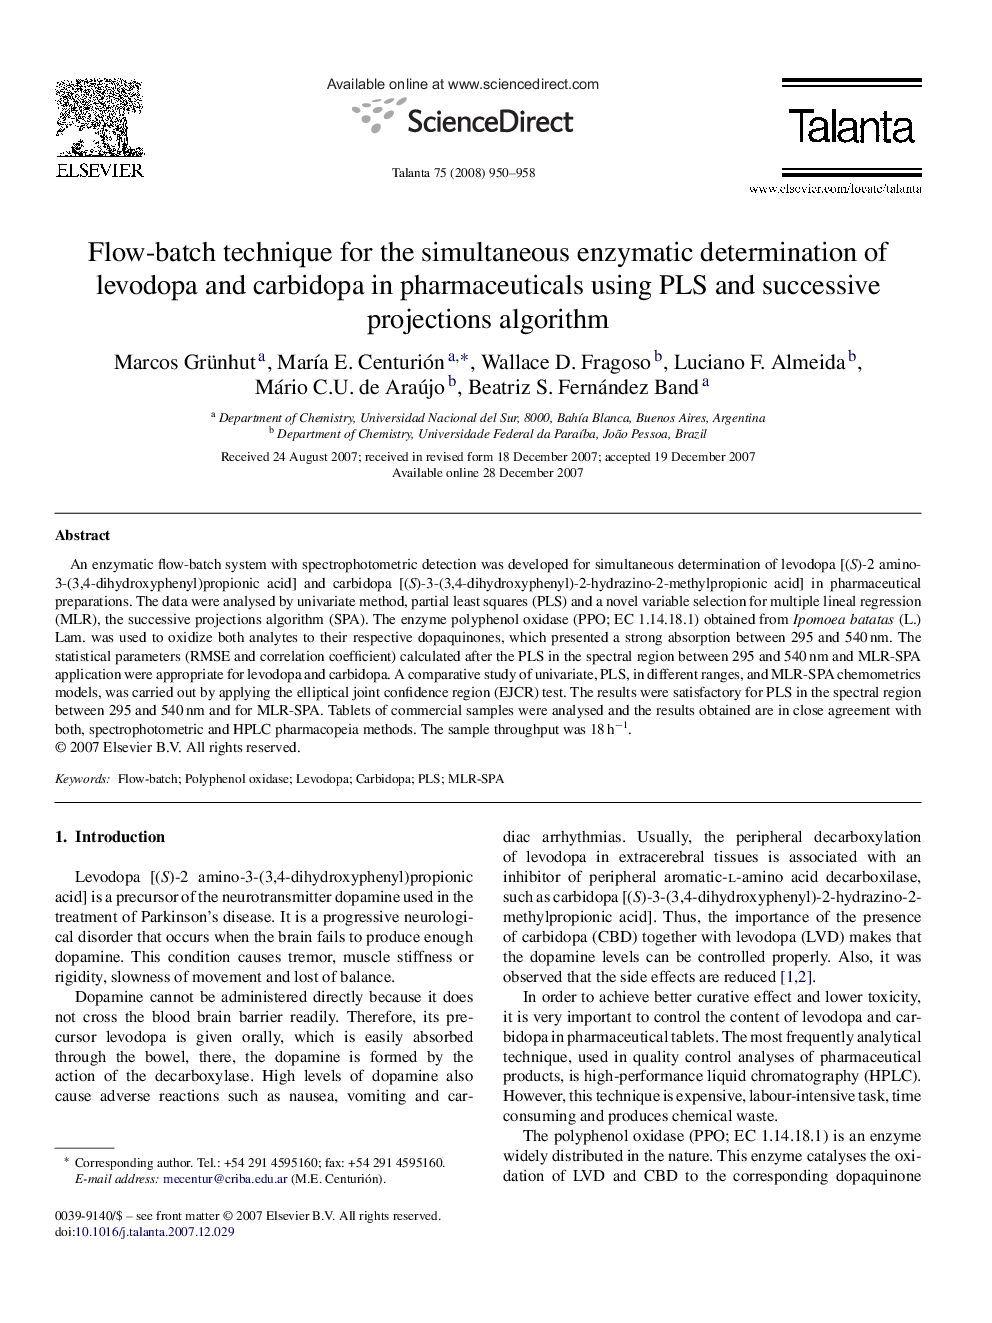 Flow-batch technique for the simultaneous enzymatic determination of levodopa and carbidopa in pharmaceuticals using PLS and successive projections algorithm